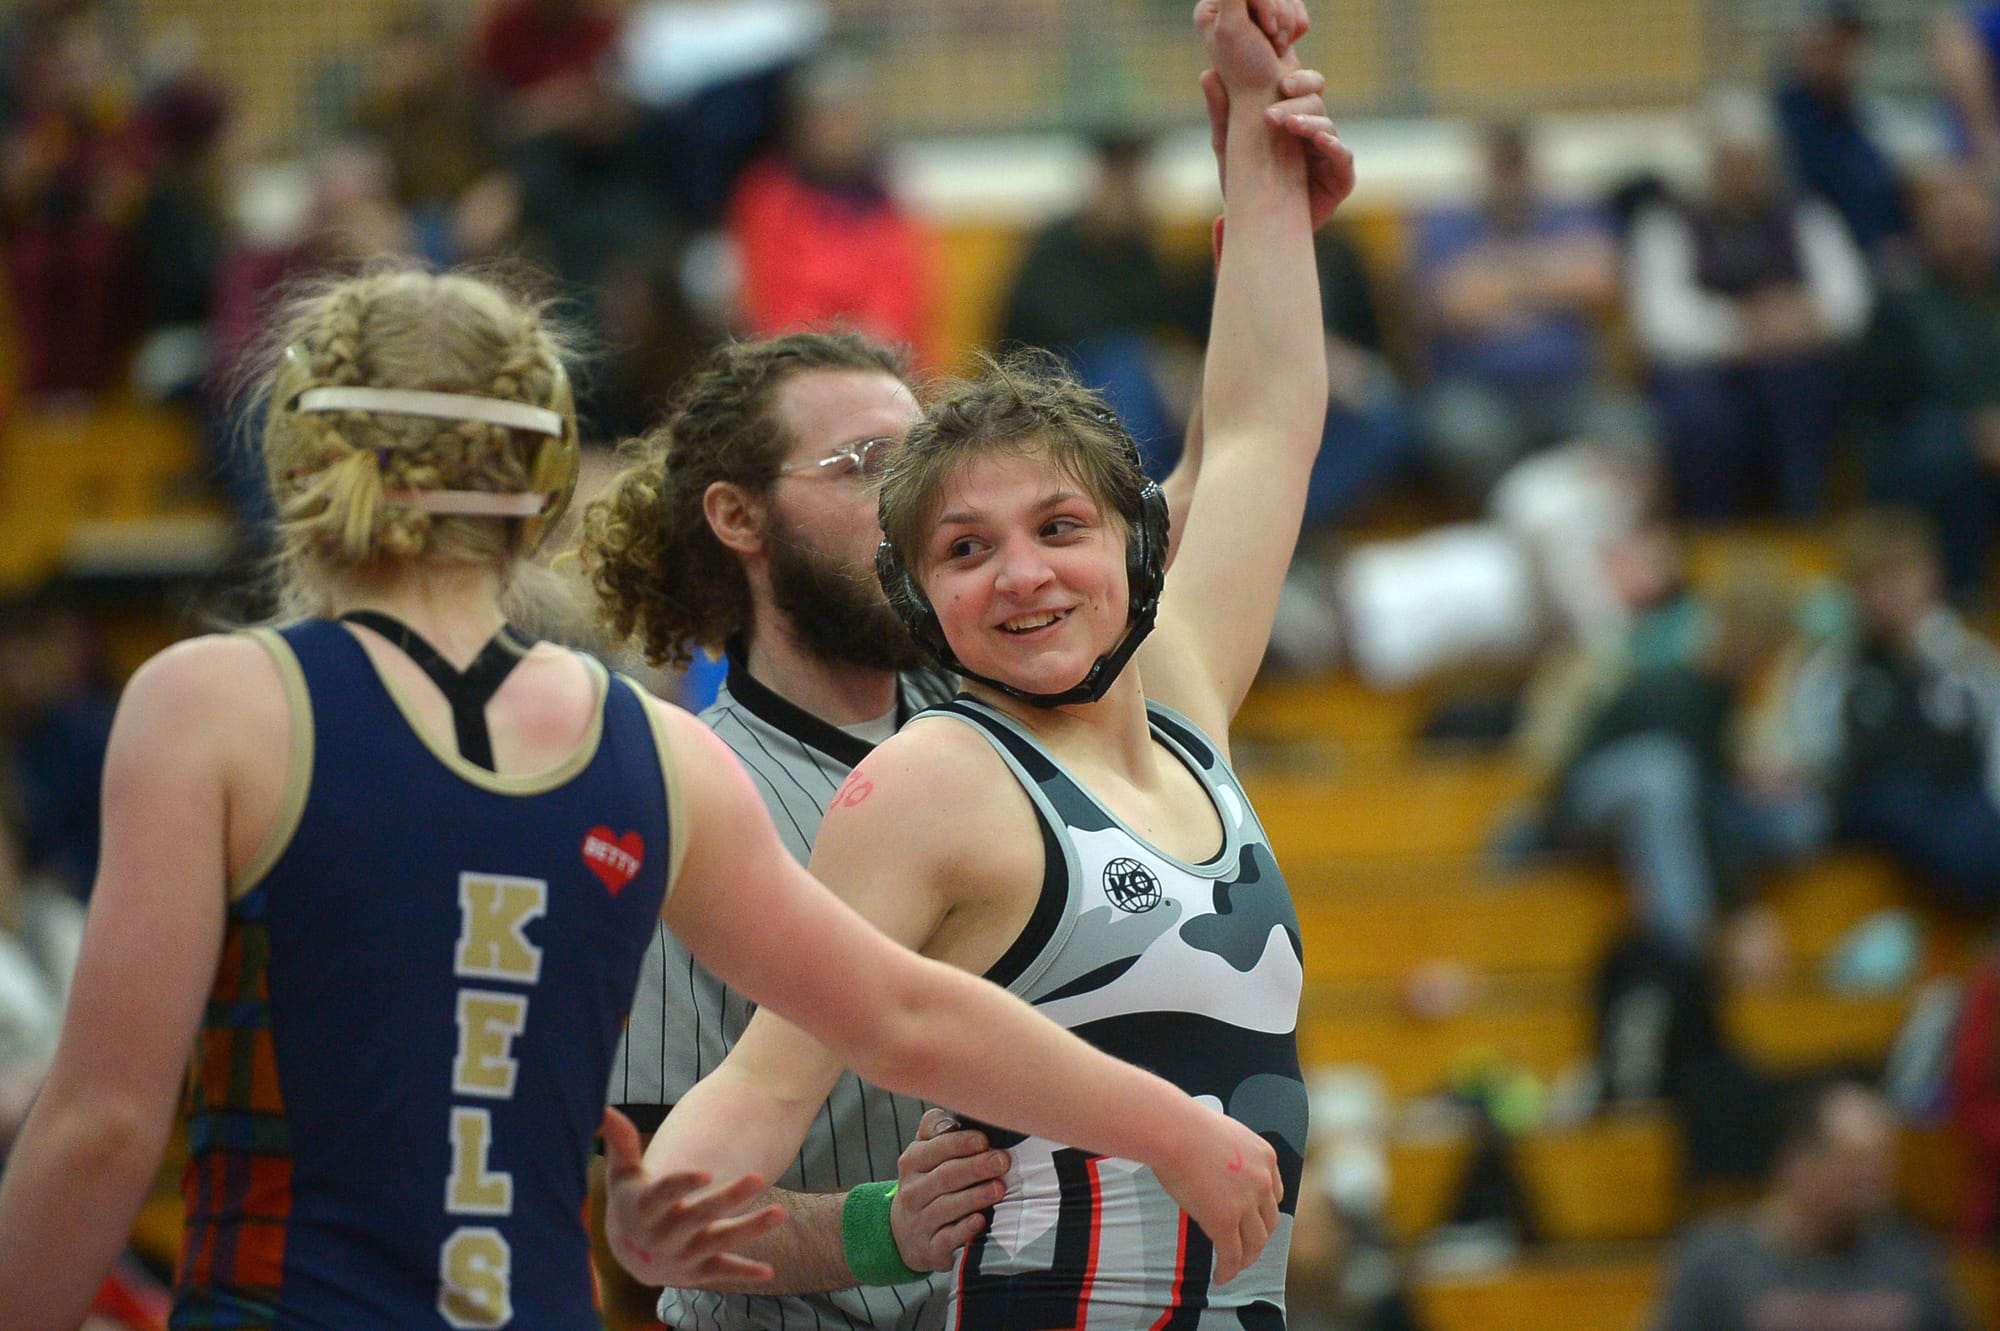 Union's Riley Aamold beats Kelso's Kyla Shoddy to win the 130-pound weight class at the Clark County Championship wrestling tournament at Skyview High School on Saturday, January 18, 2020.